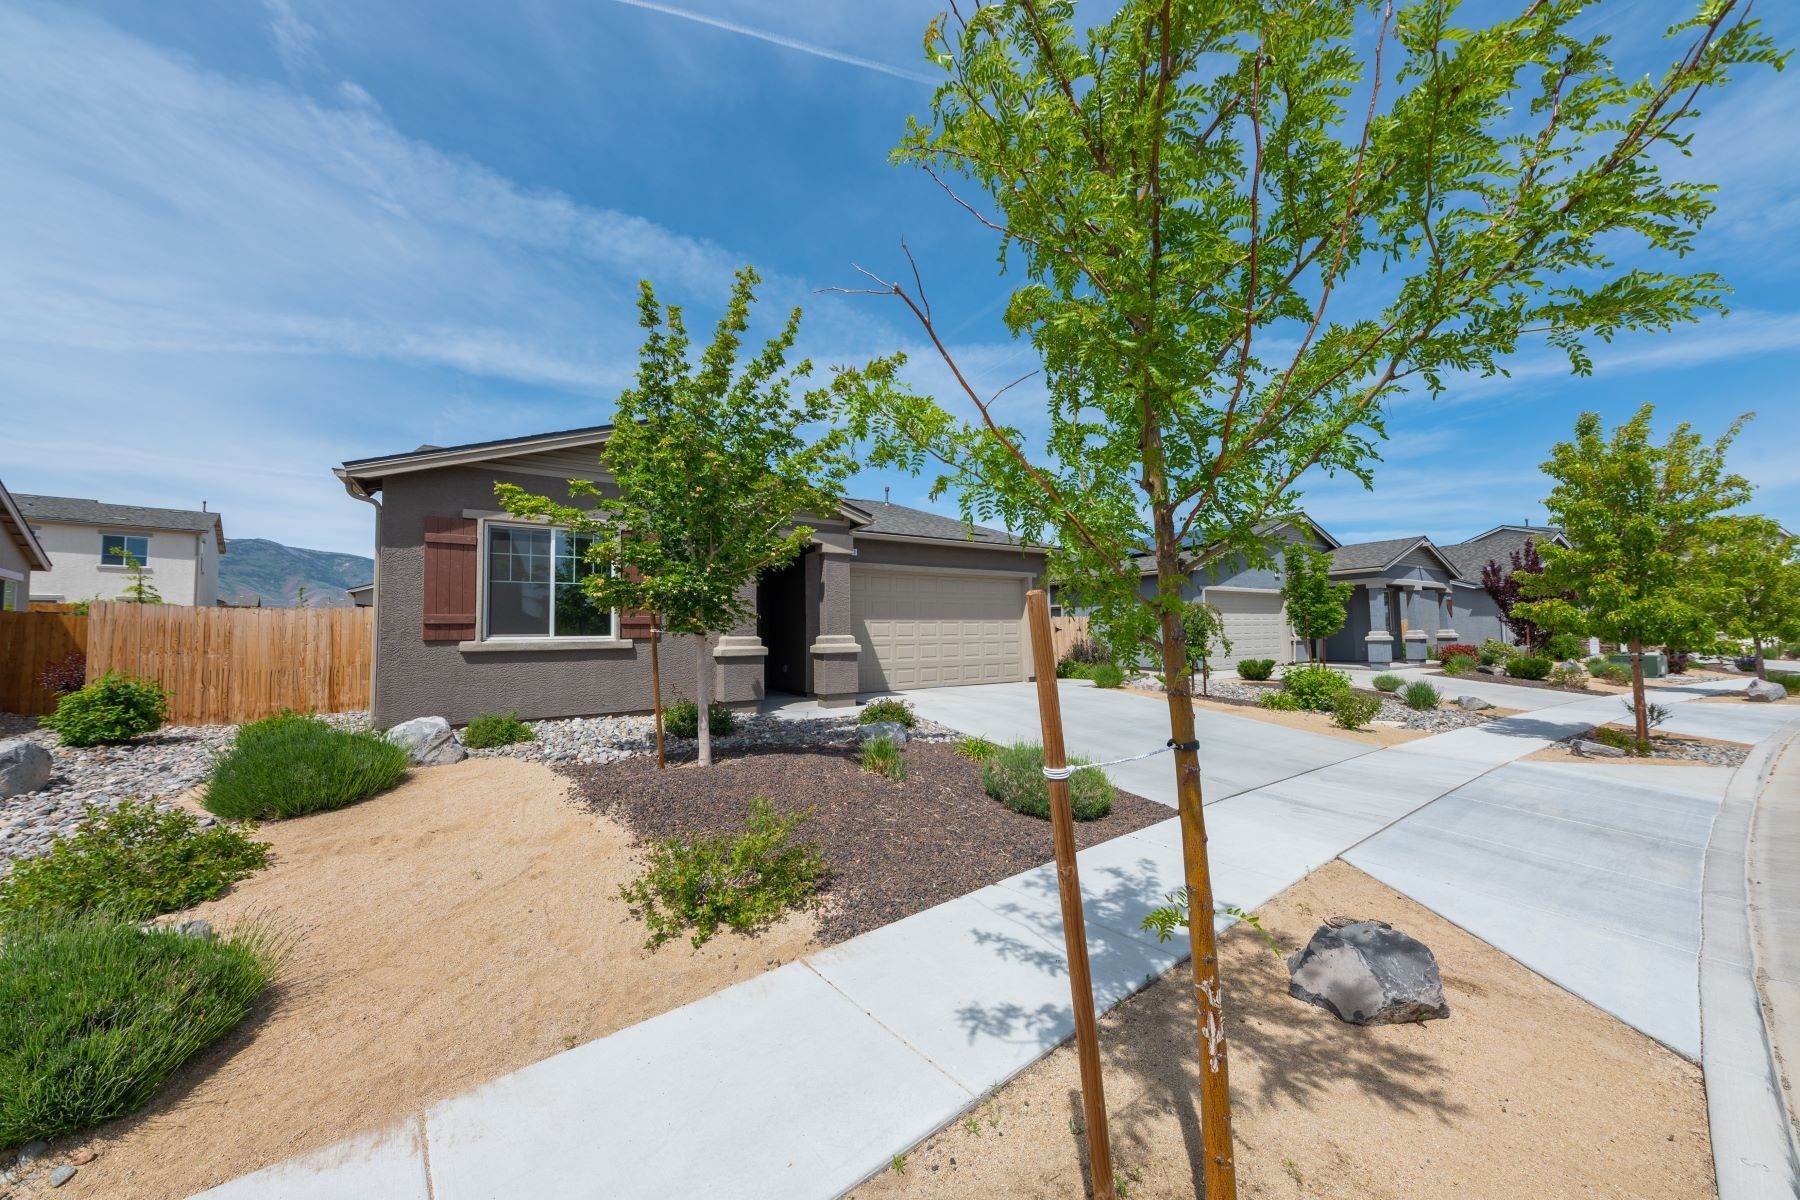 2. Single Family Homes for Active at Single Story Home Built in 2018 9363 Bay Dr Reno, Nevada 89506 United States